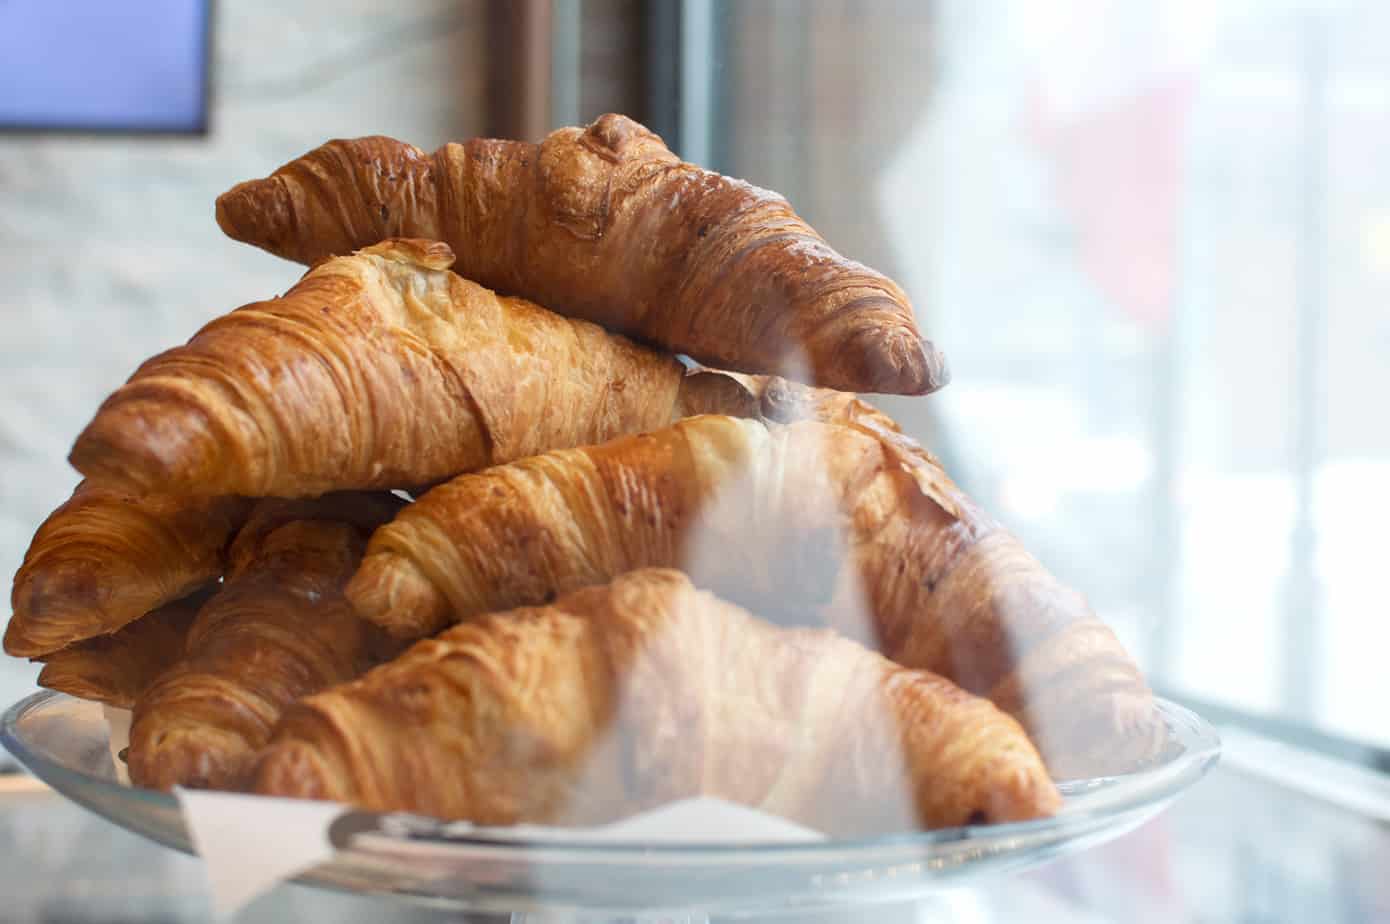 A pile of croissants on a plate in Portsmouth New Hampshire